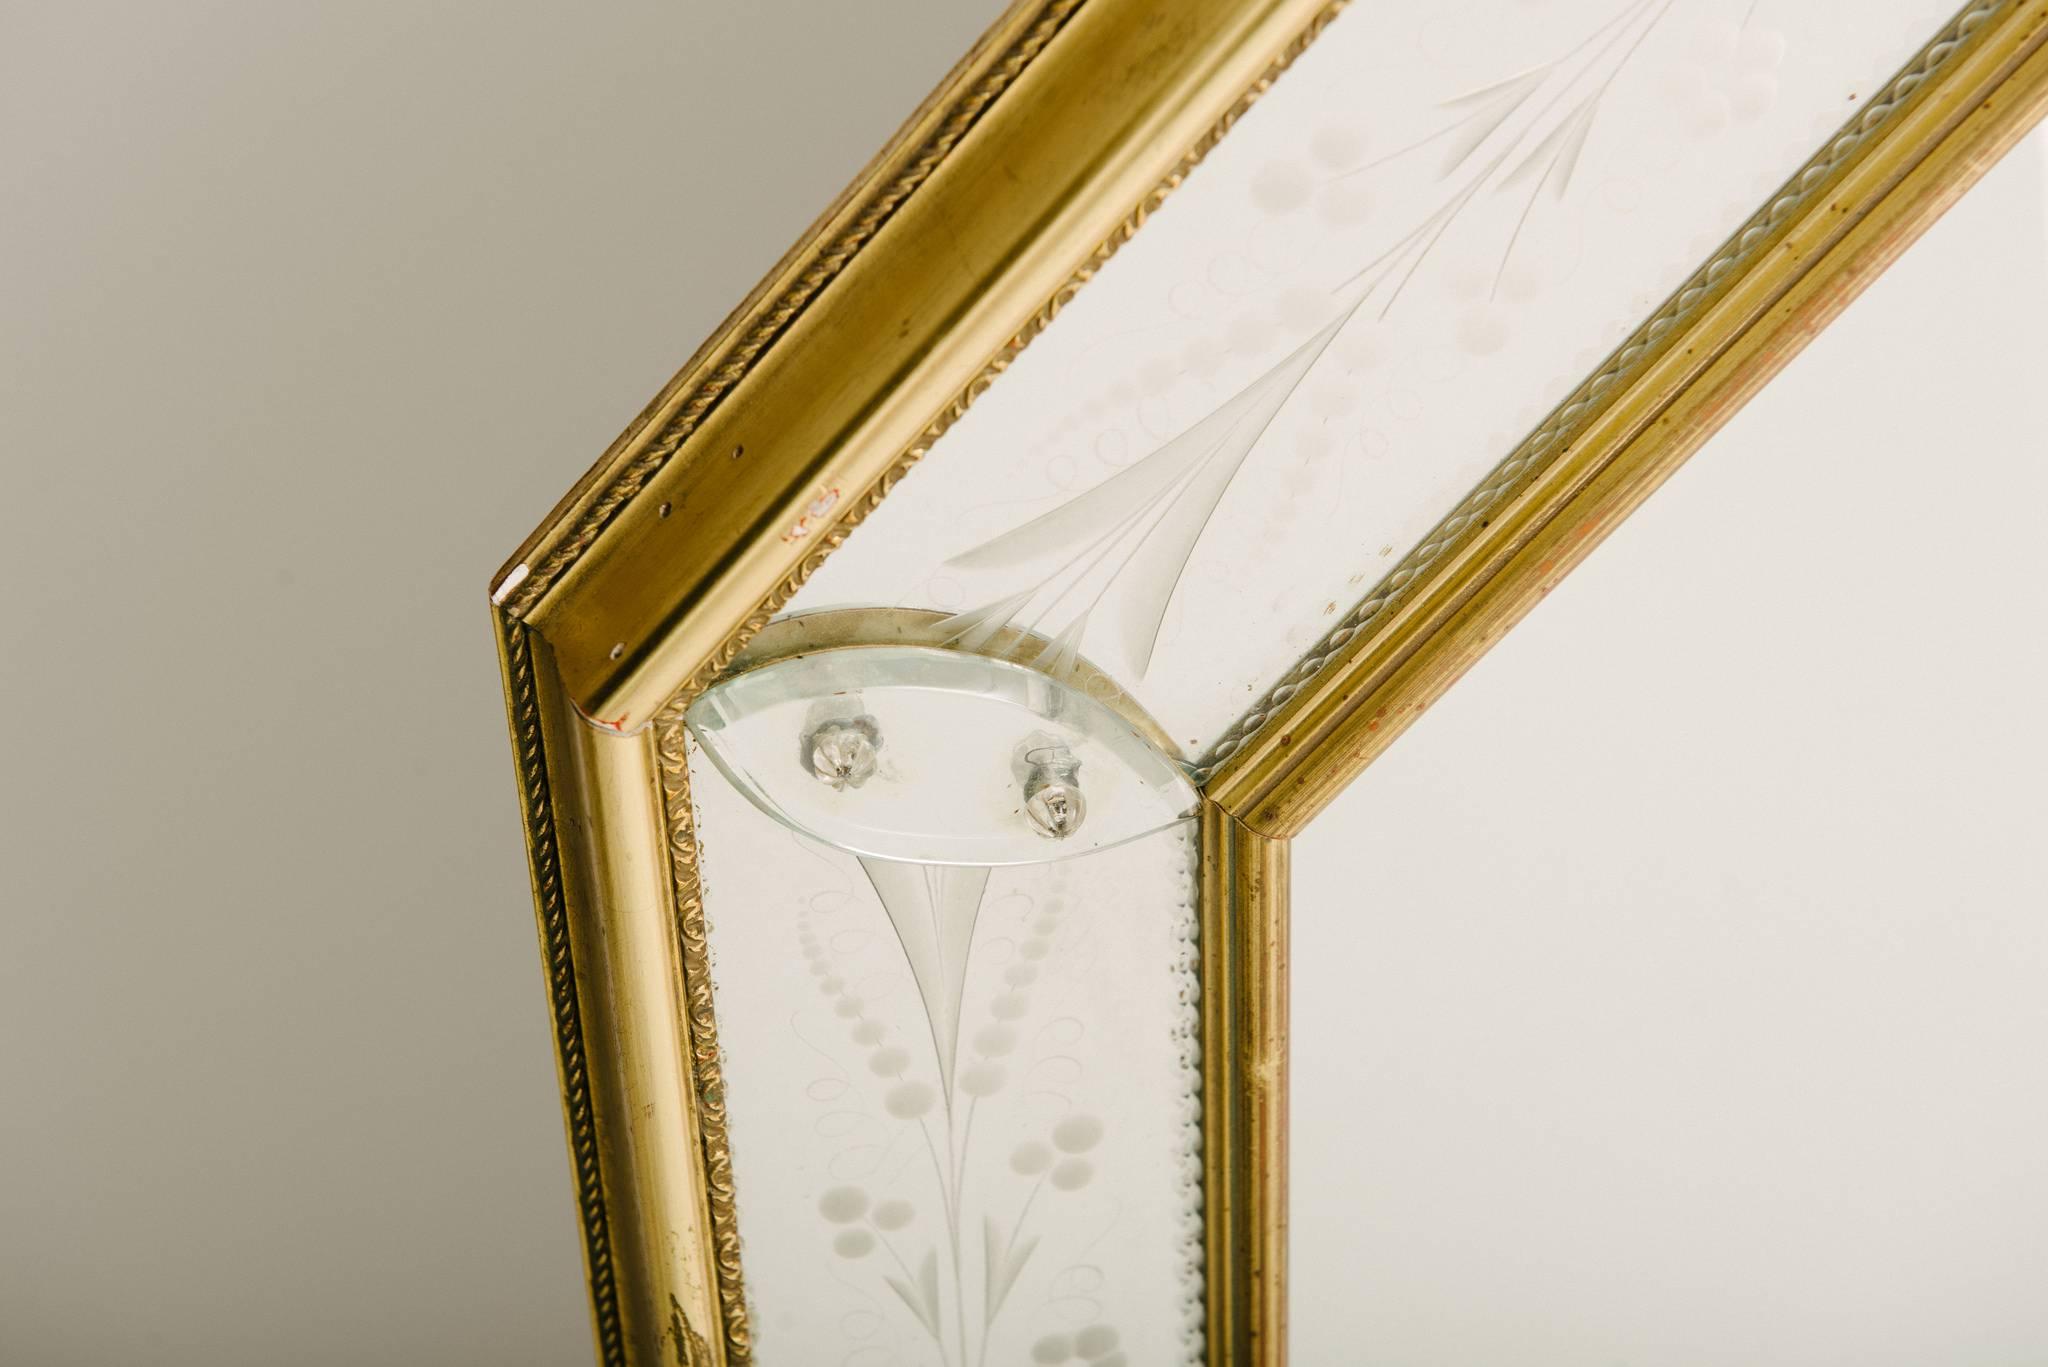 Large octagonal Venetian mirror with giltwood frame. Measures: 52